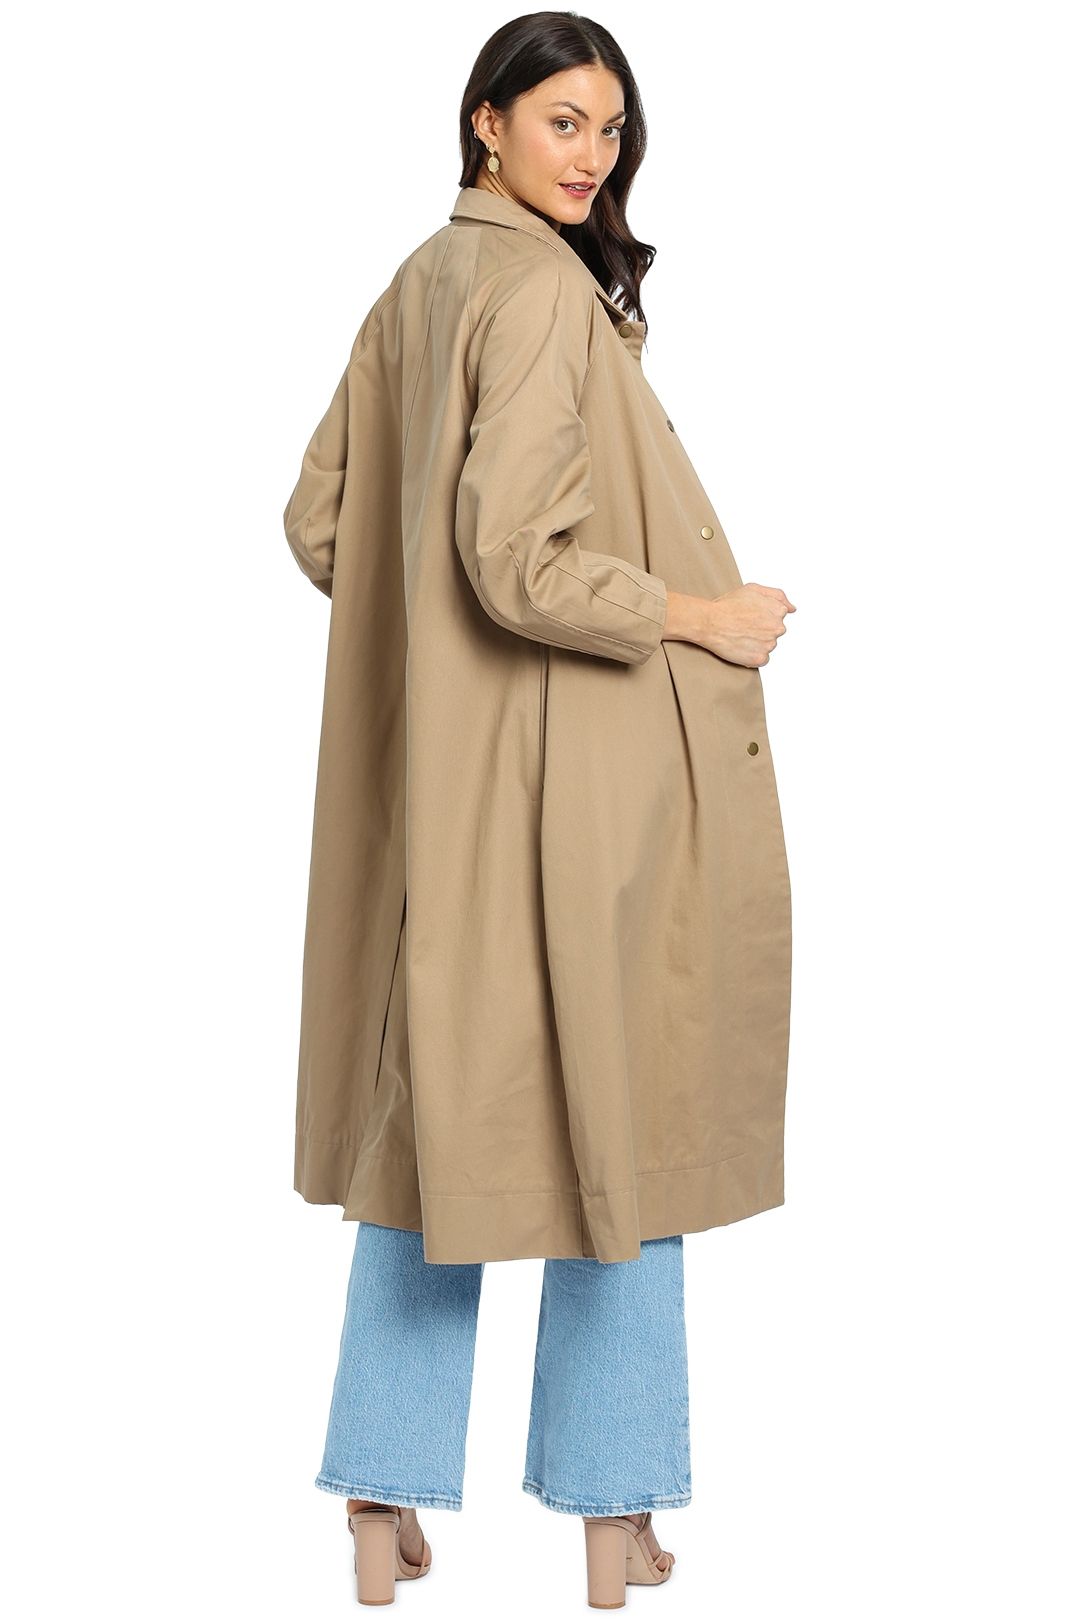 Marle Cali Trench Long Sleeves